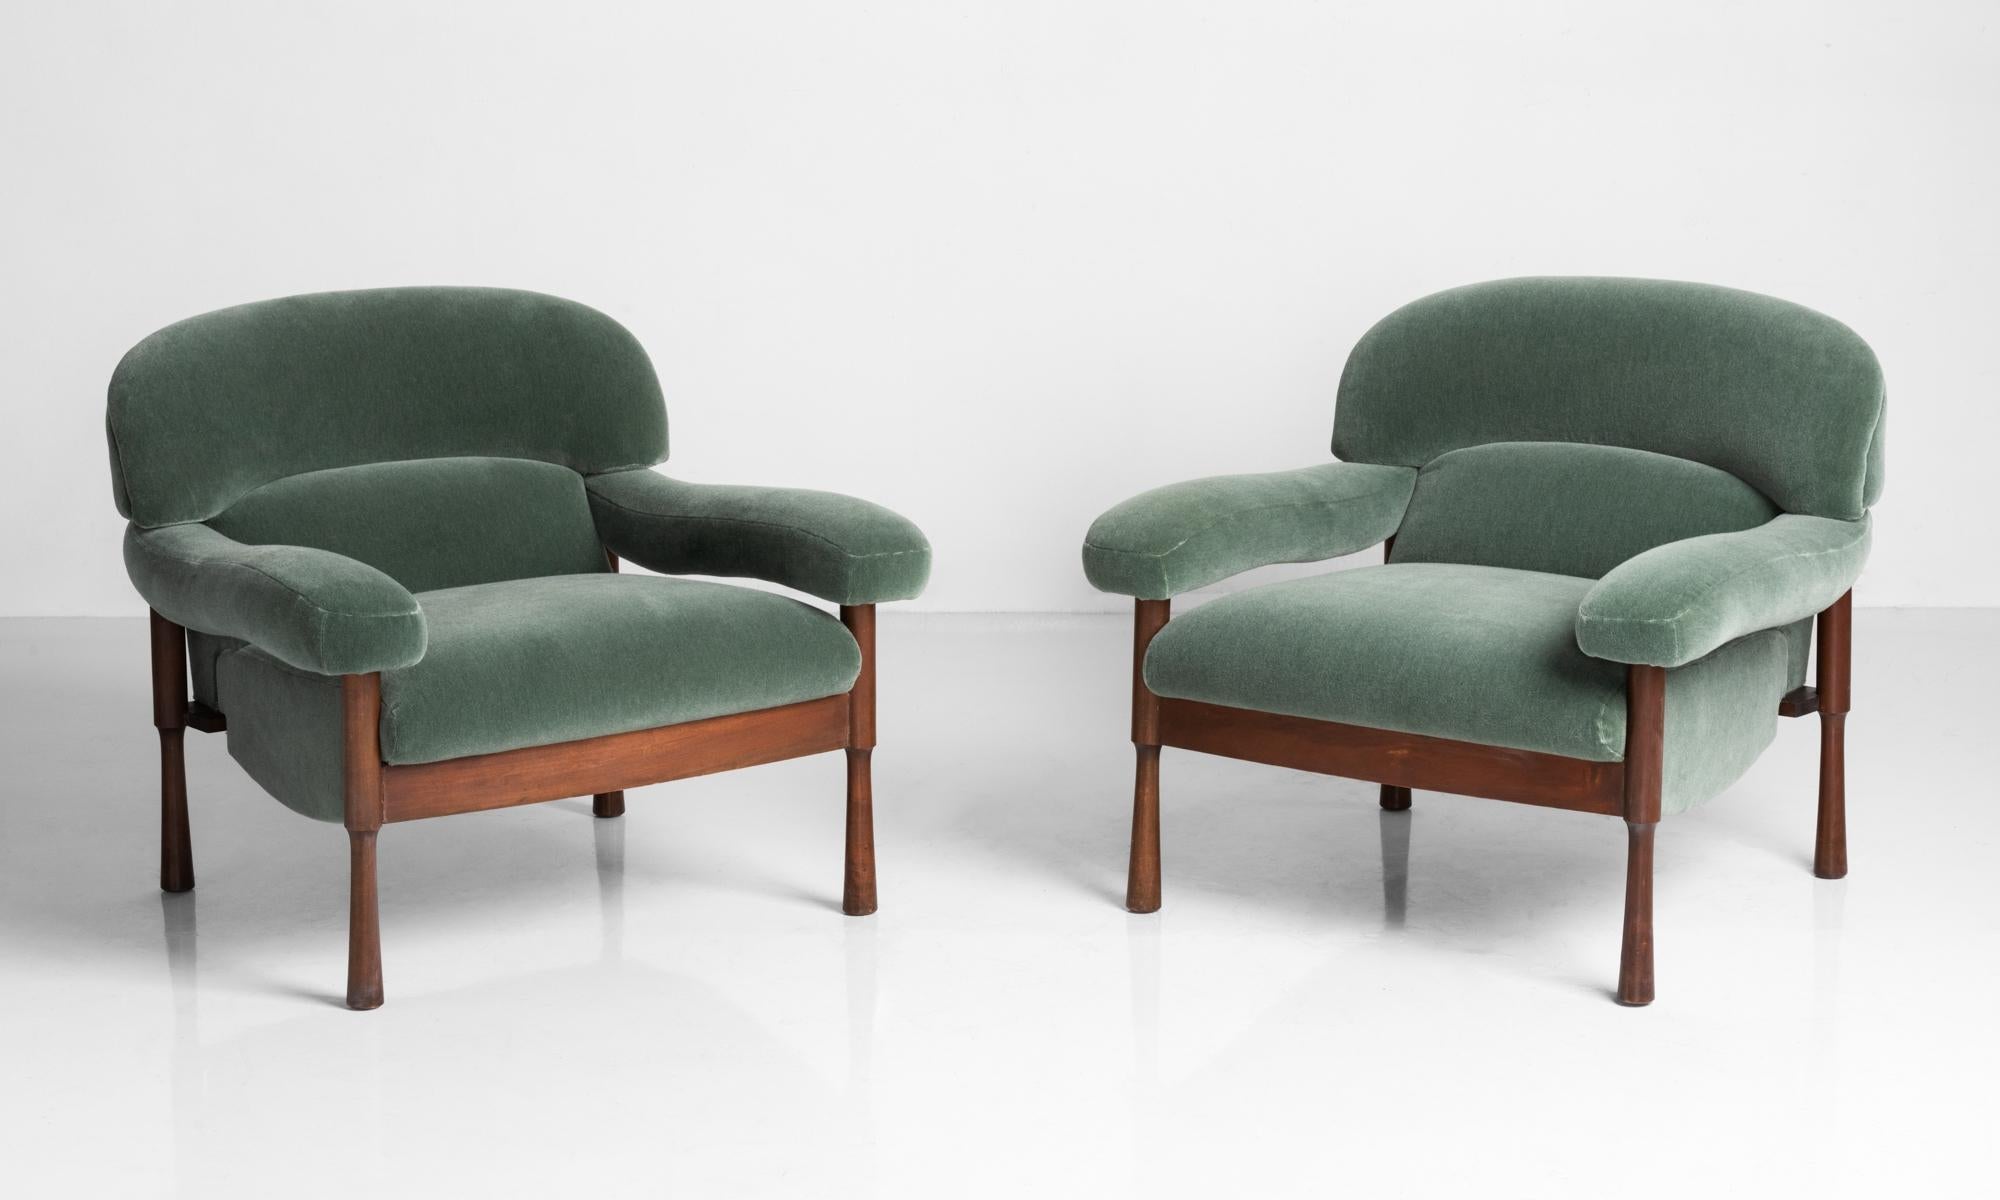 Green Mohair armchairs by Elam, Italy, circa 1960.

Newly upholstered forms with generous curves and original wood frame.